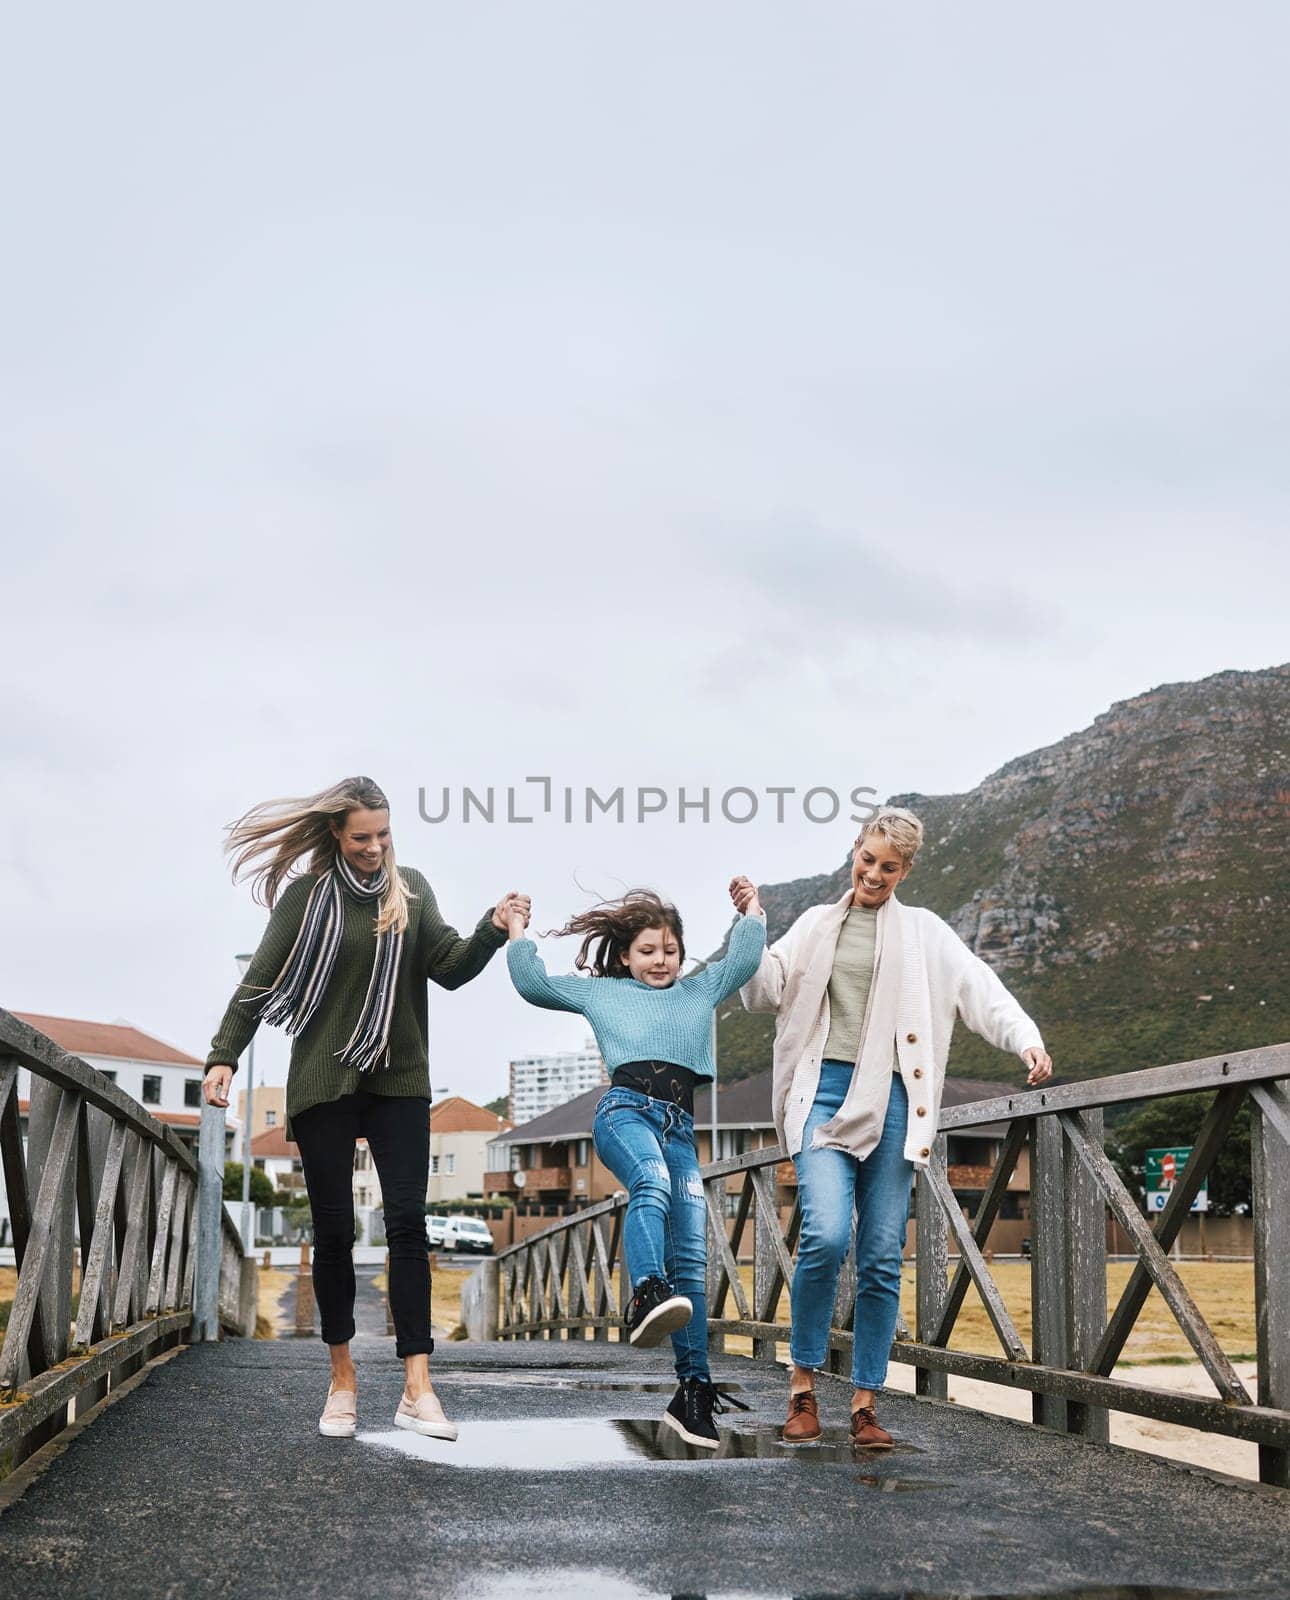 Happy, travel and family on outdoor walk while on a spring vacation, adventure or journey. Grandmother, mother and girl child walking on bridge together with happiness, fun and bond while on holiday